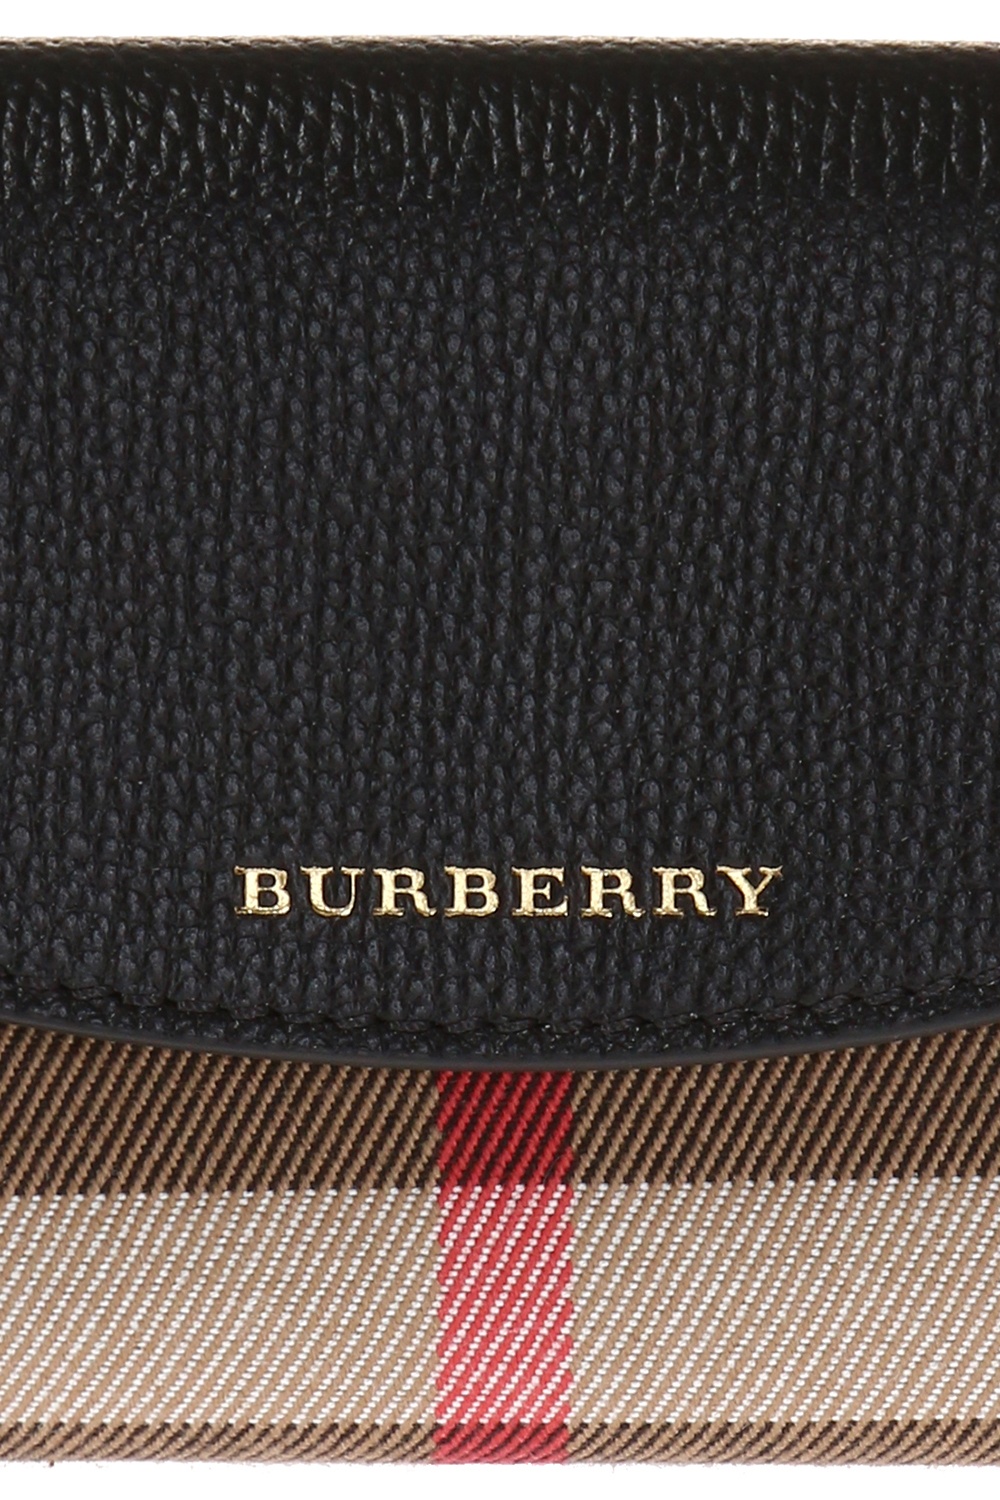 Burberry Checked wallet | Women's Accessories | Vitkac